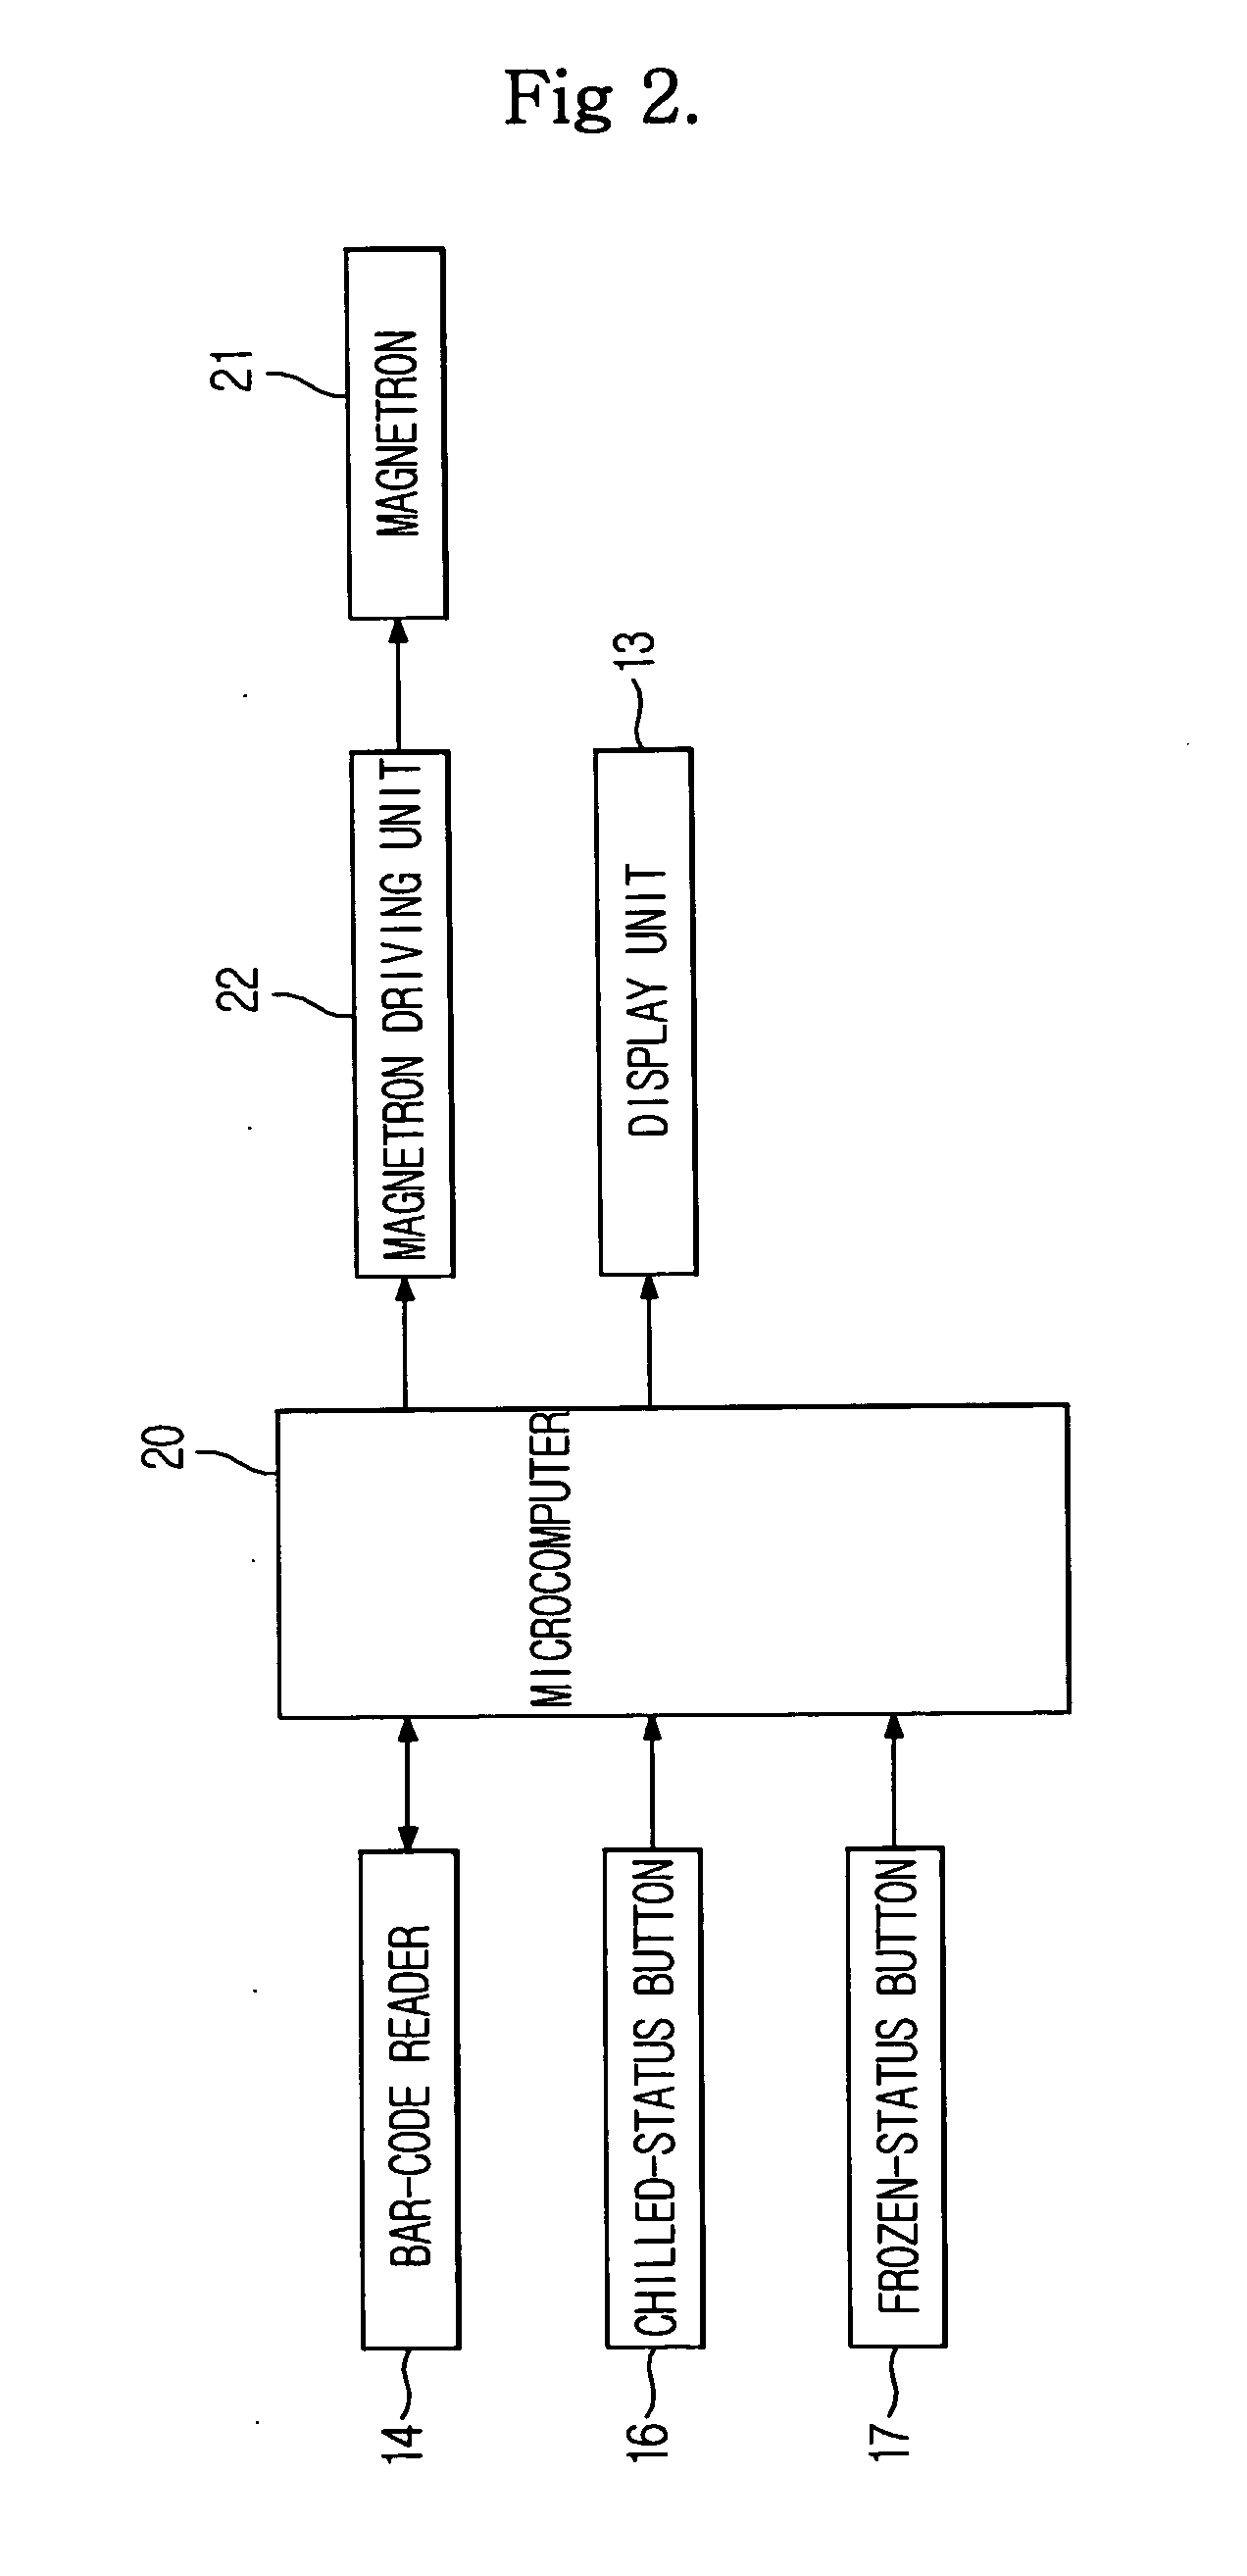 Bar-code reading cooking apparatus and method